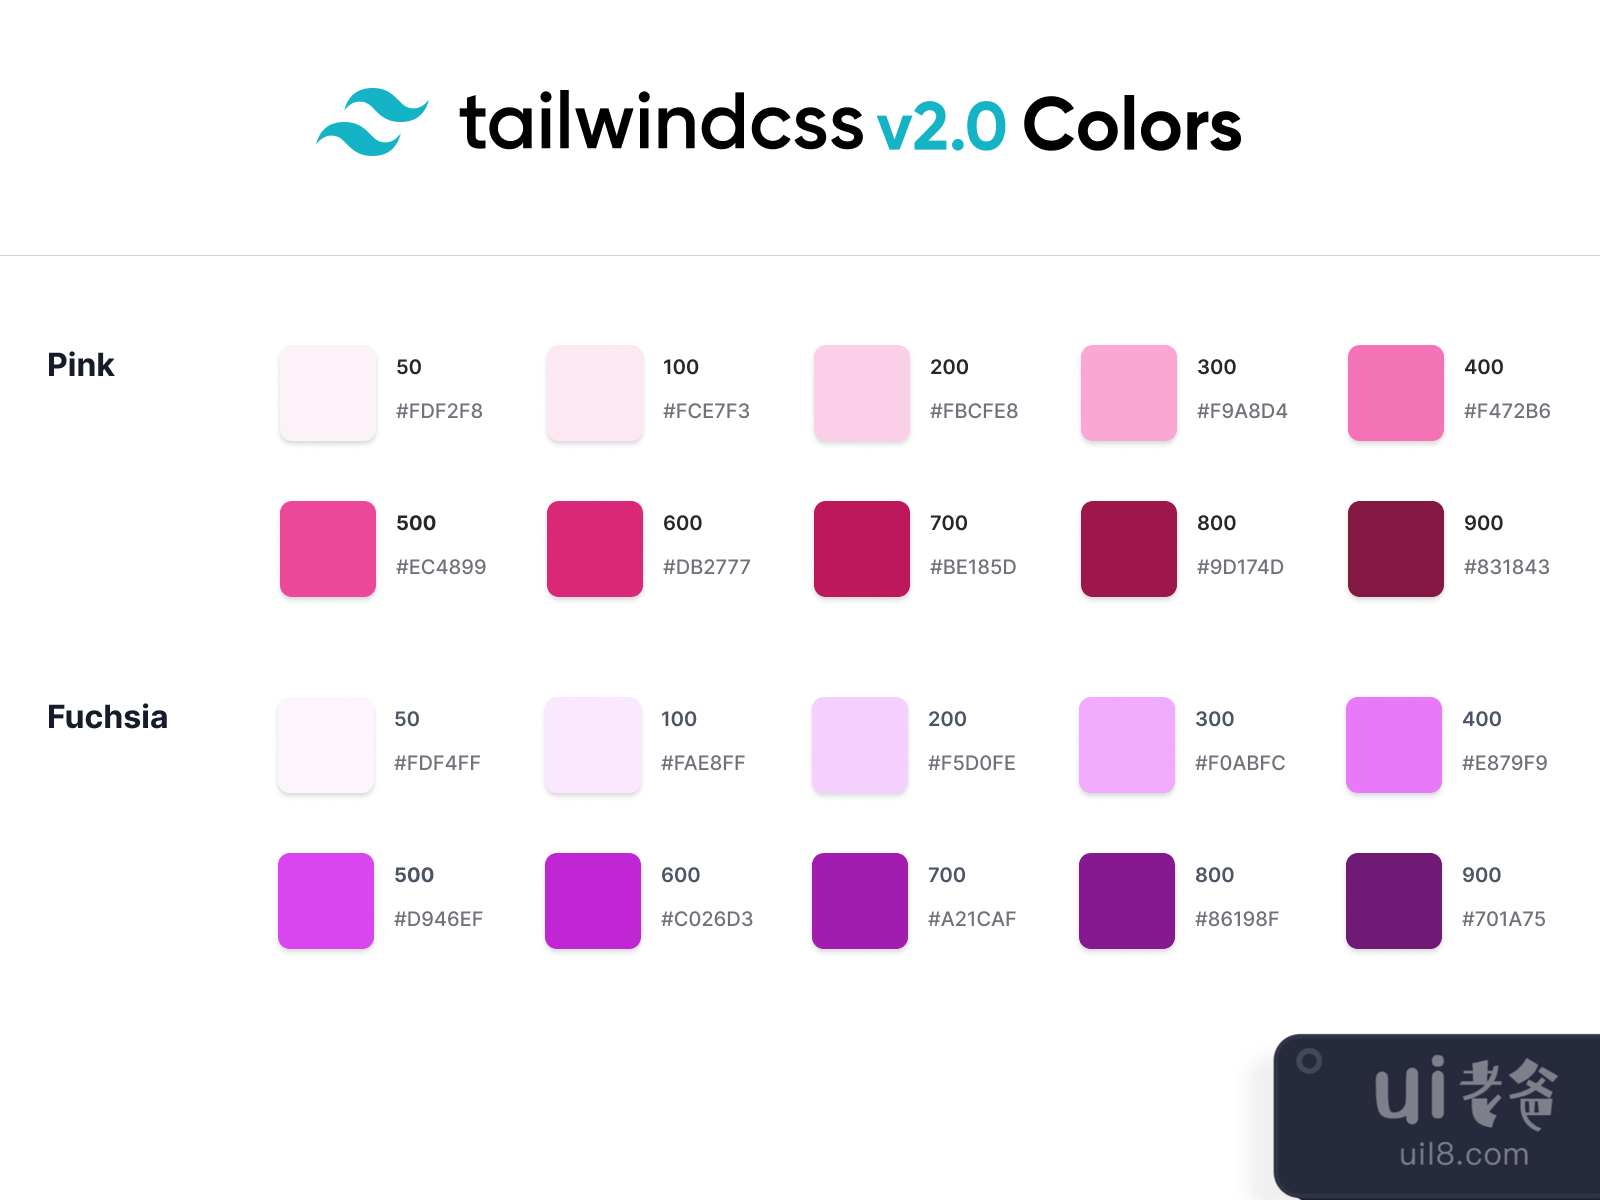 TailwindCSS Colors v2.0 for Figma and Adobe XD No 2